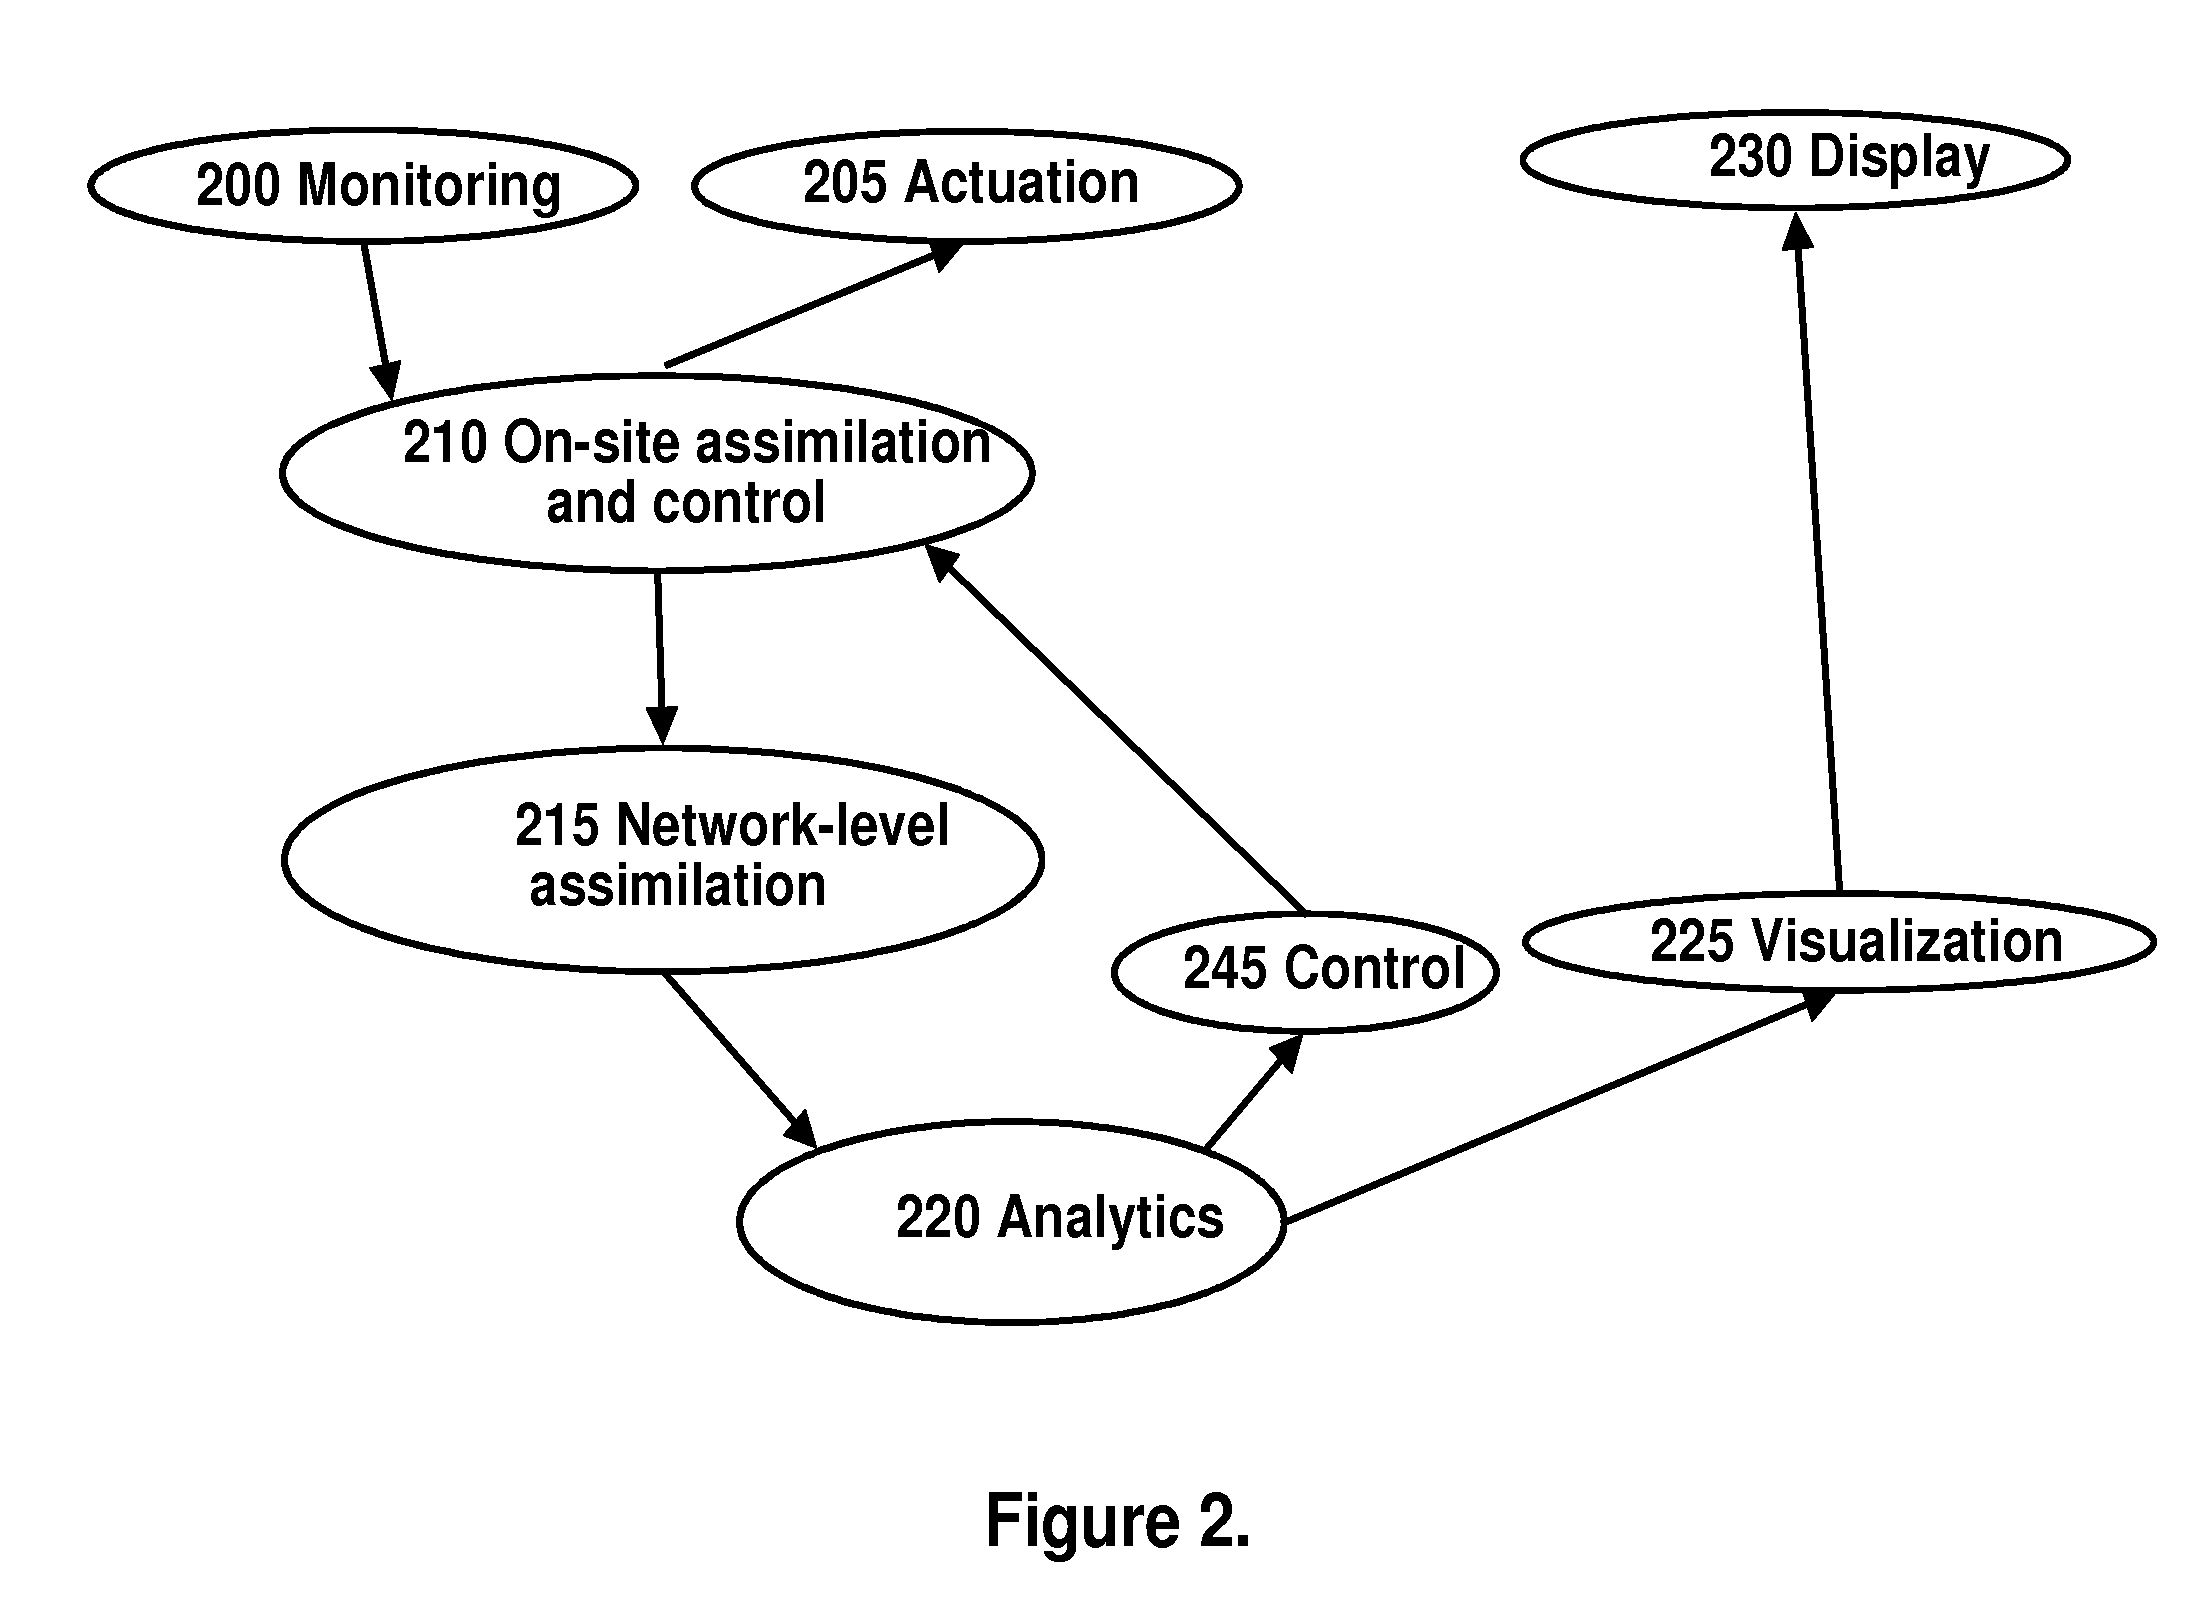 System and Methods for Distributed Web-Enabled Monitoring, Analysis, Human Understanding, and Multi-Modal Control of Utility Consumption